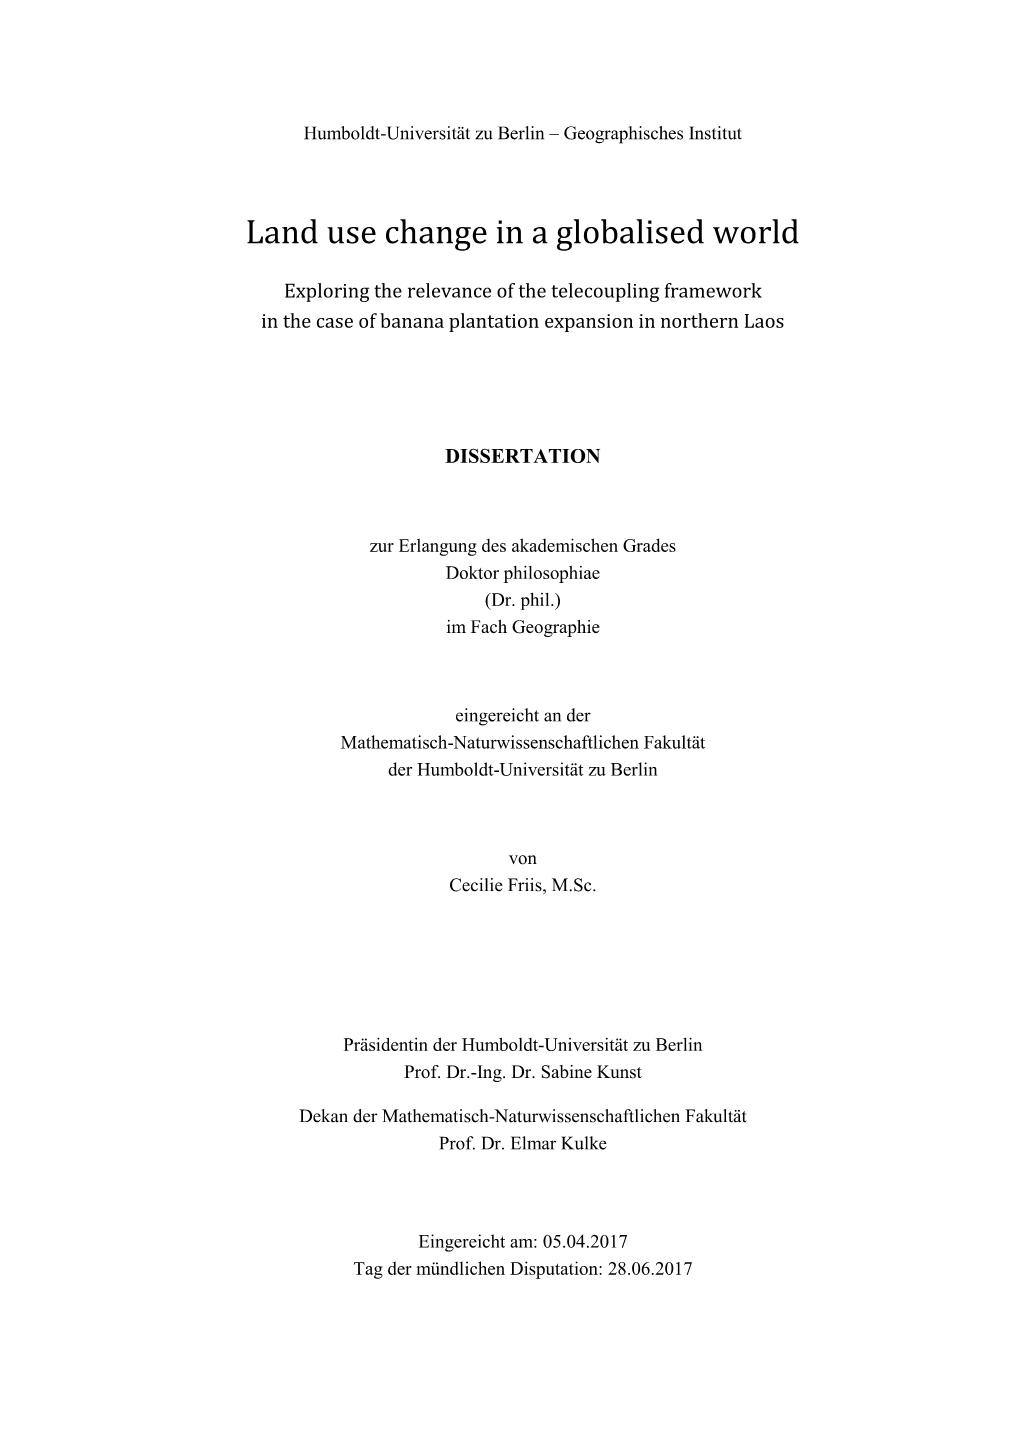 Land Use Change in a Globalised World. Exploring the Relevance of the Telecoupling Framework in the Case of Banana Plantation Ex